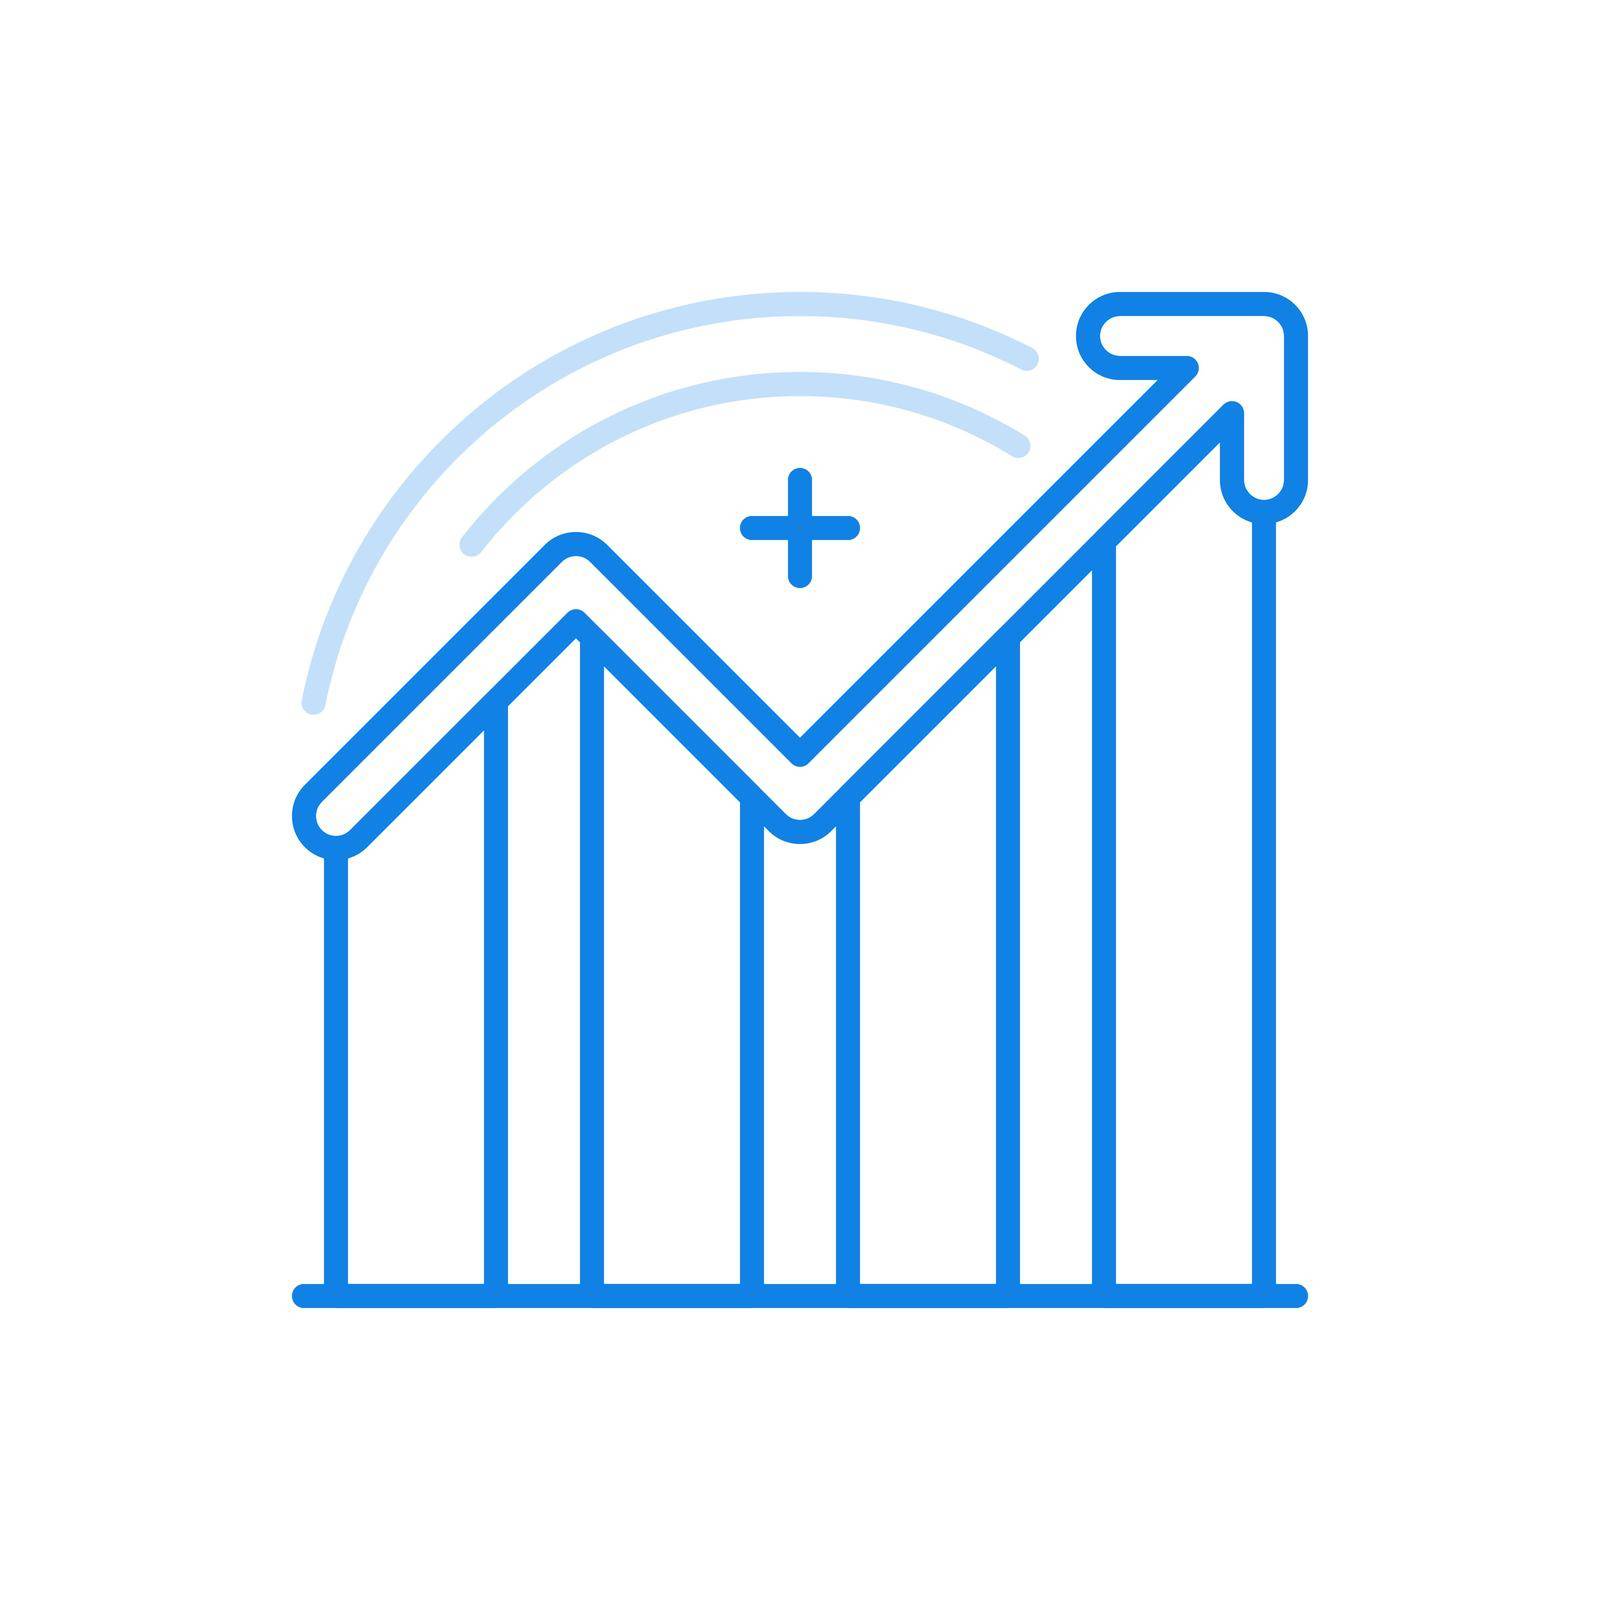 Statistical growth indicators vector line icon. Profit increase chart with upward curved arrow. Marketing infographics economy development and profit. Increased production with sharp demand.